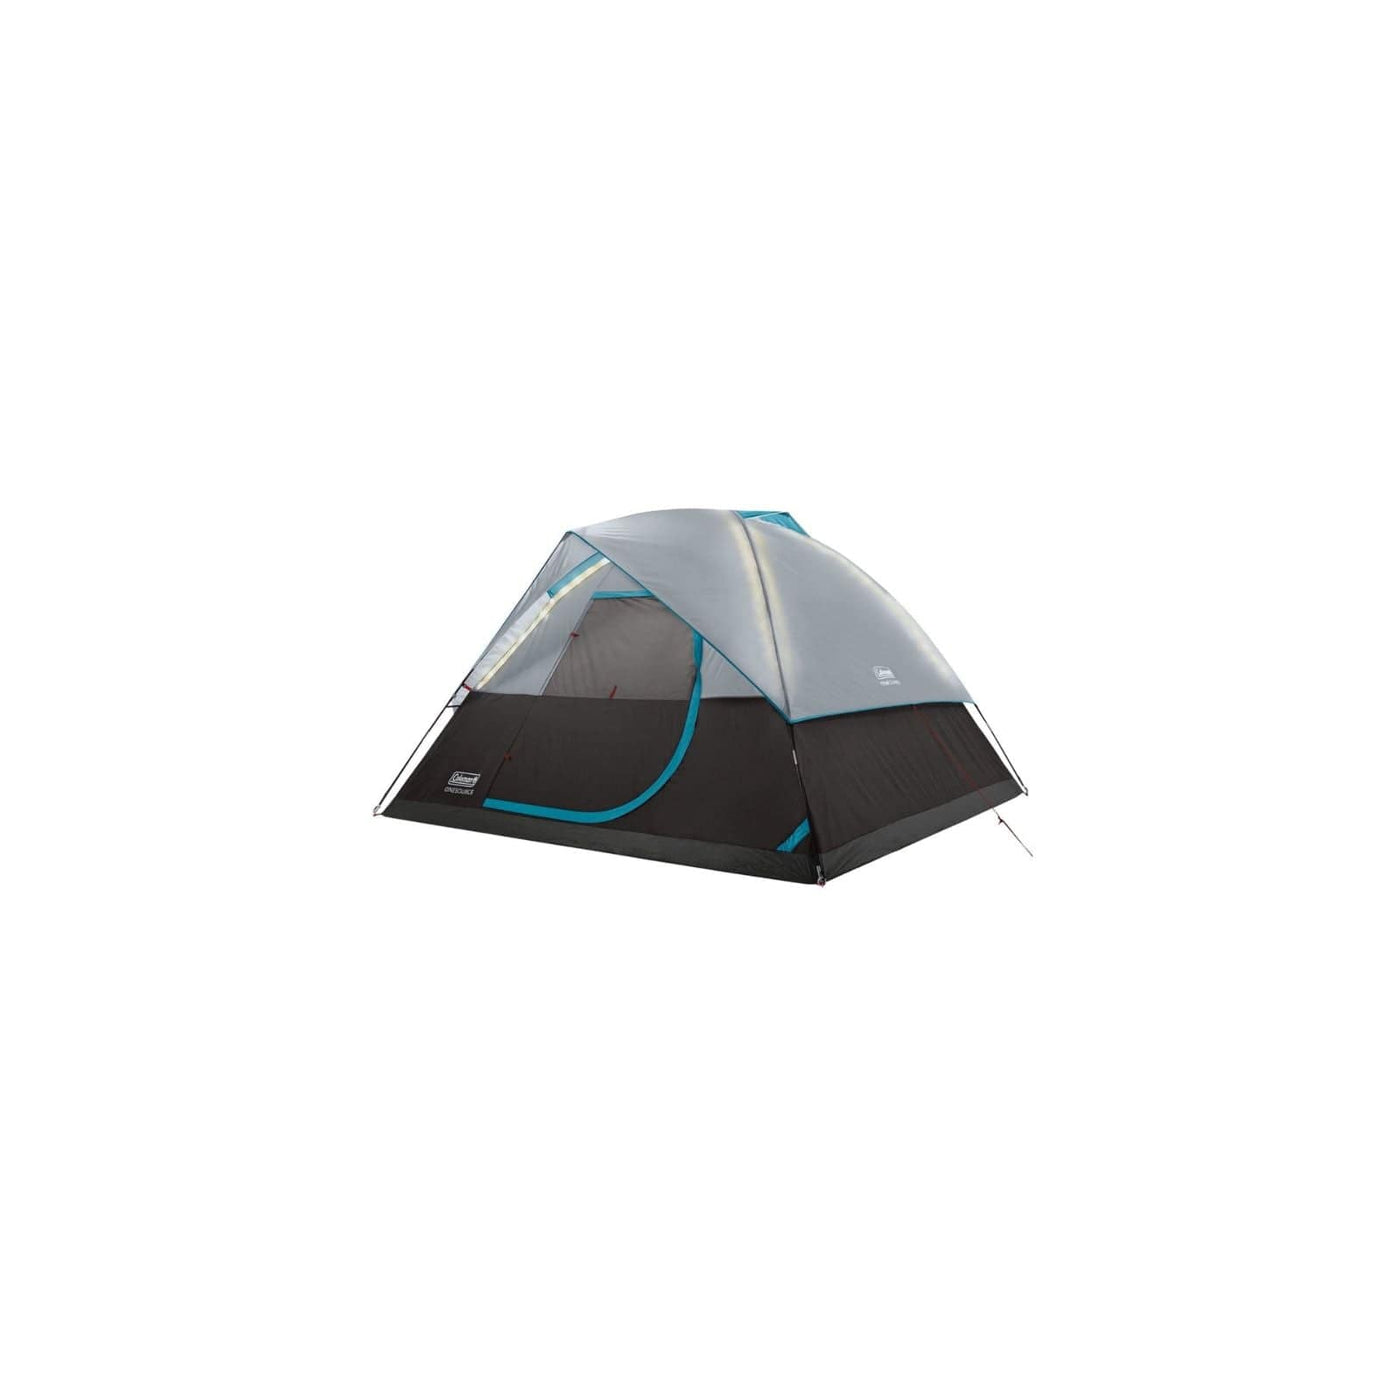 Coleman Coleman Tent Dome Onesource 4P C001 Camping And Outdoor